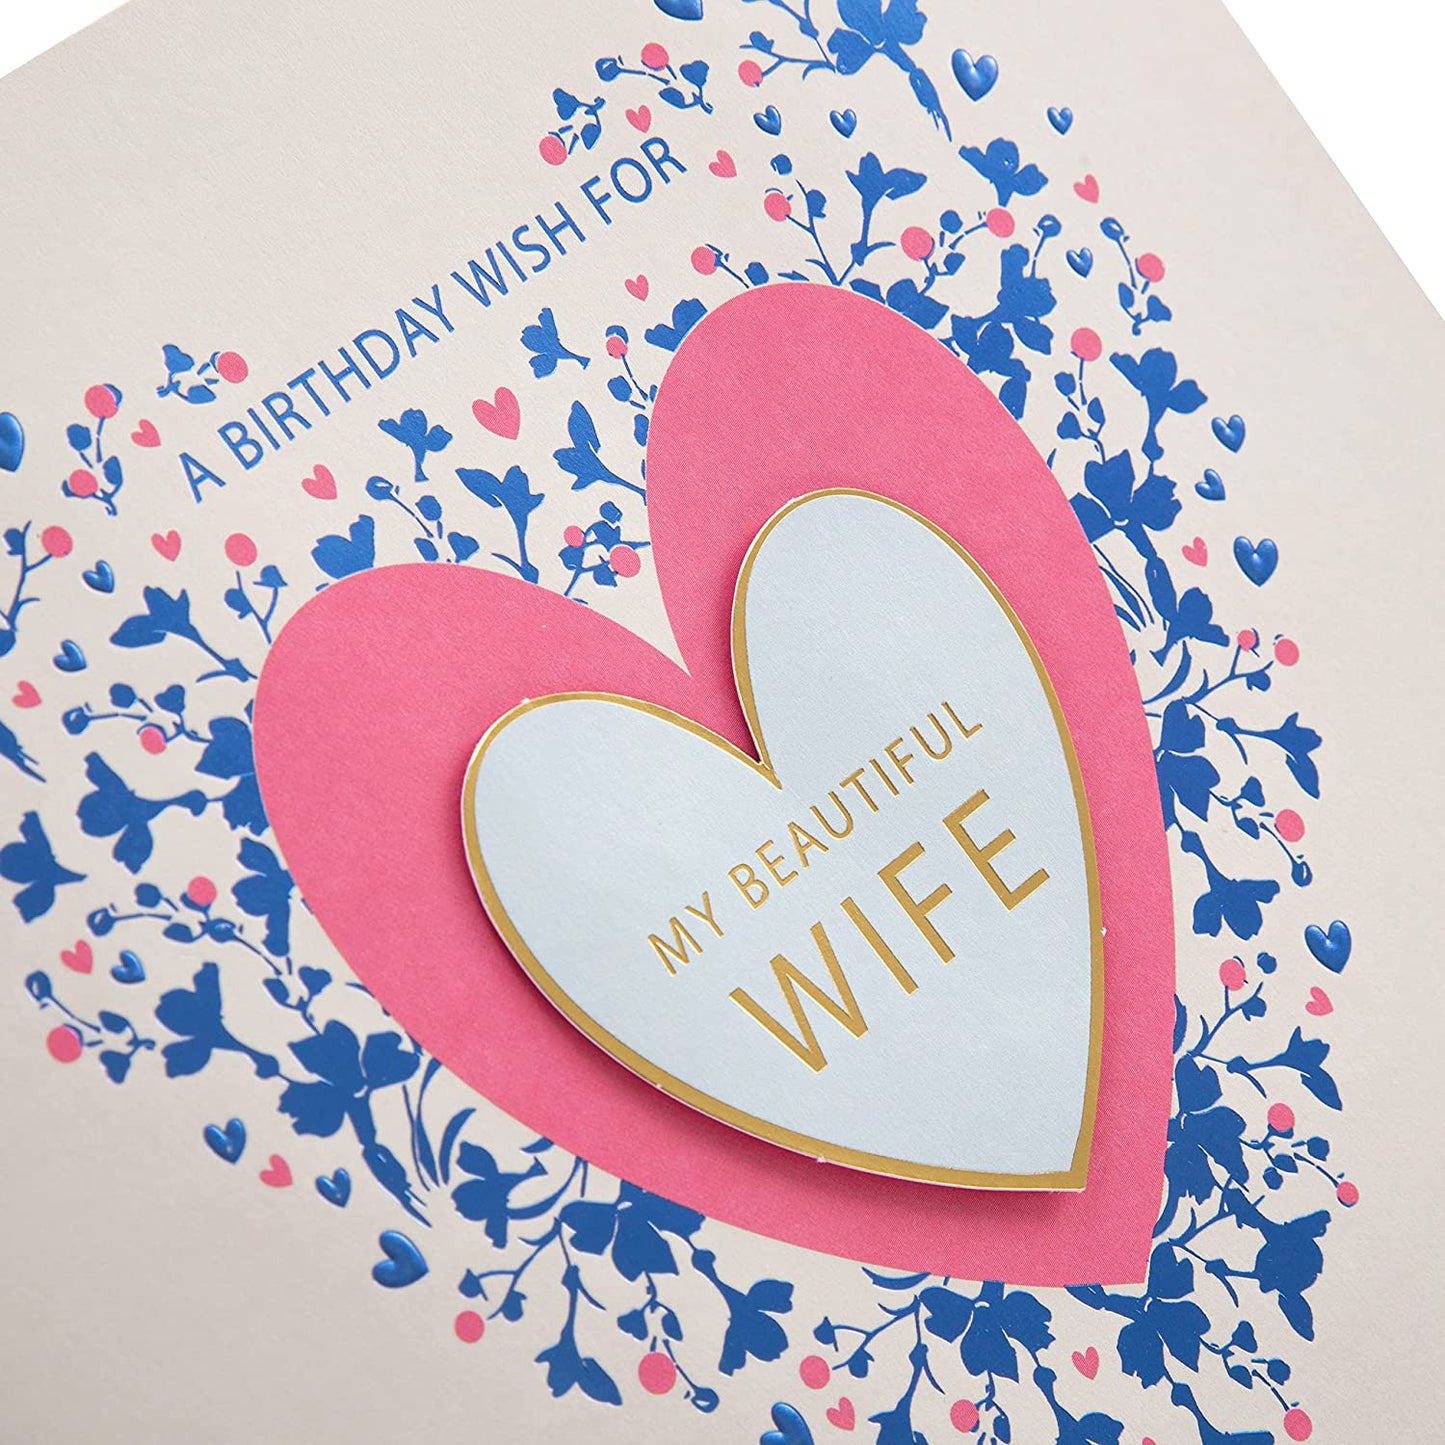 Contemporary Love Heart Design Large Birthday Card for Wife